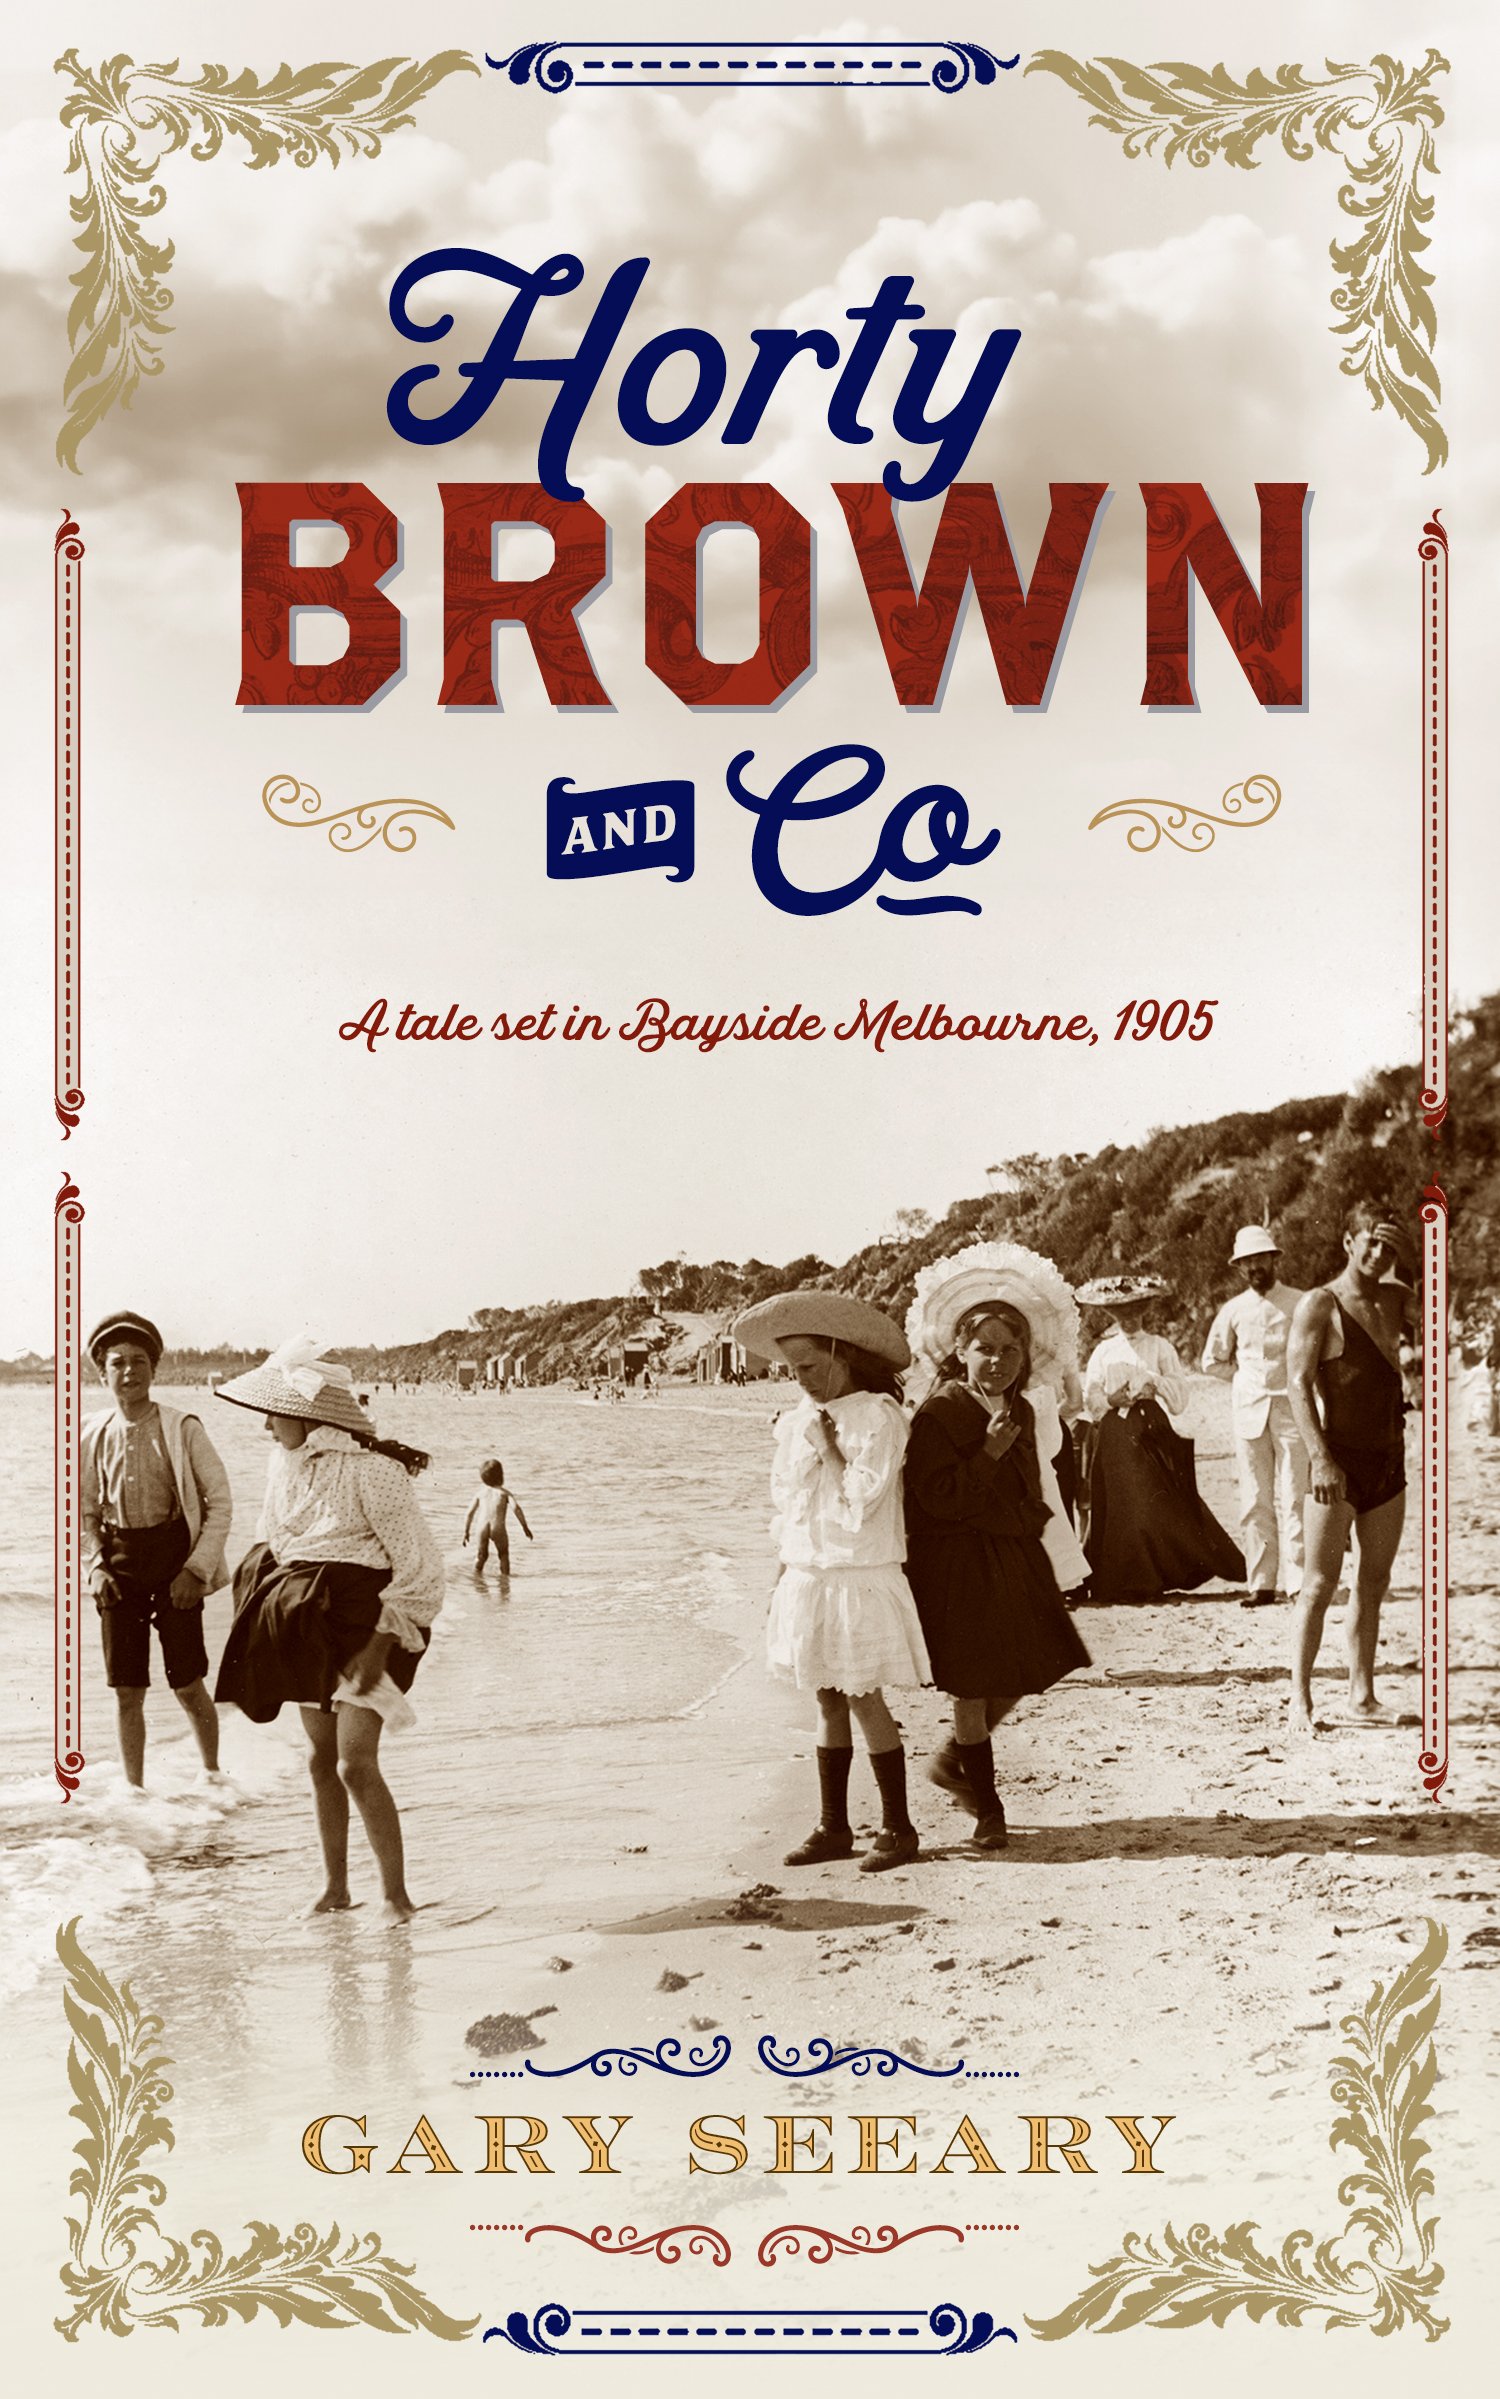 Horty Brown and Co_front cover.jpg